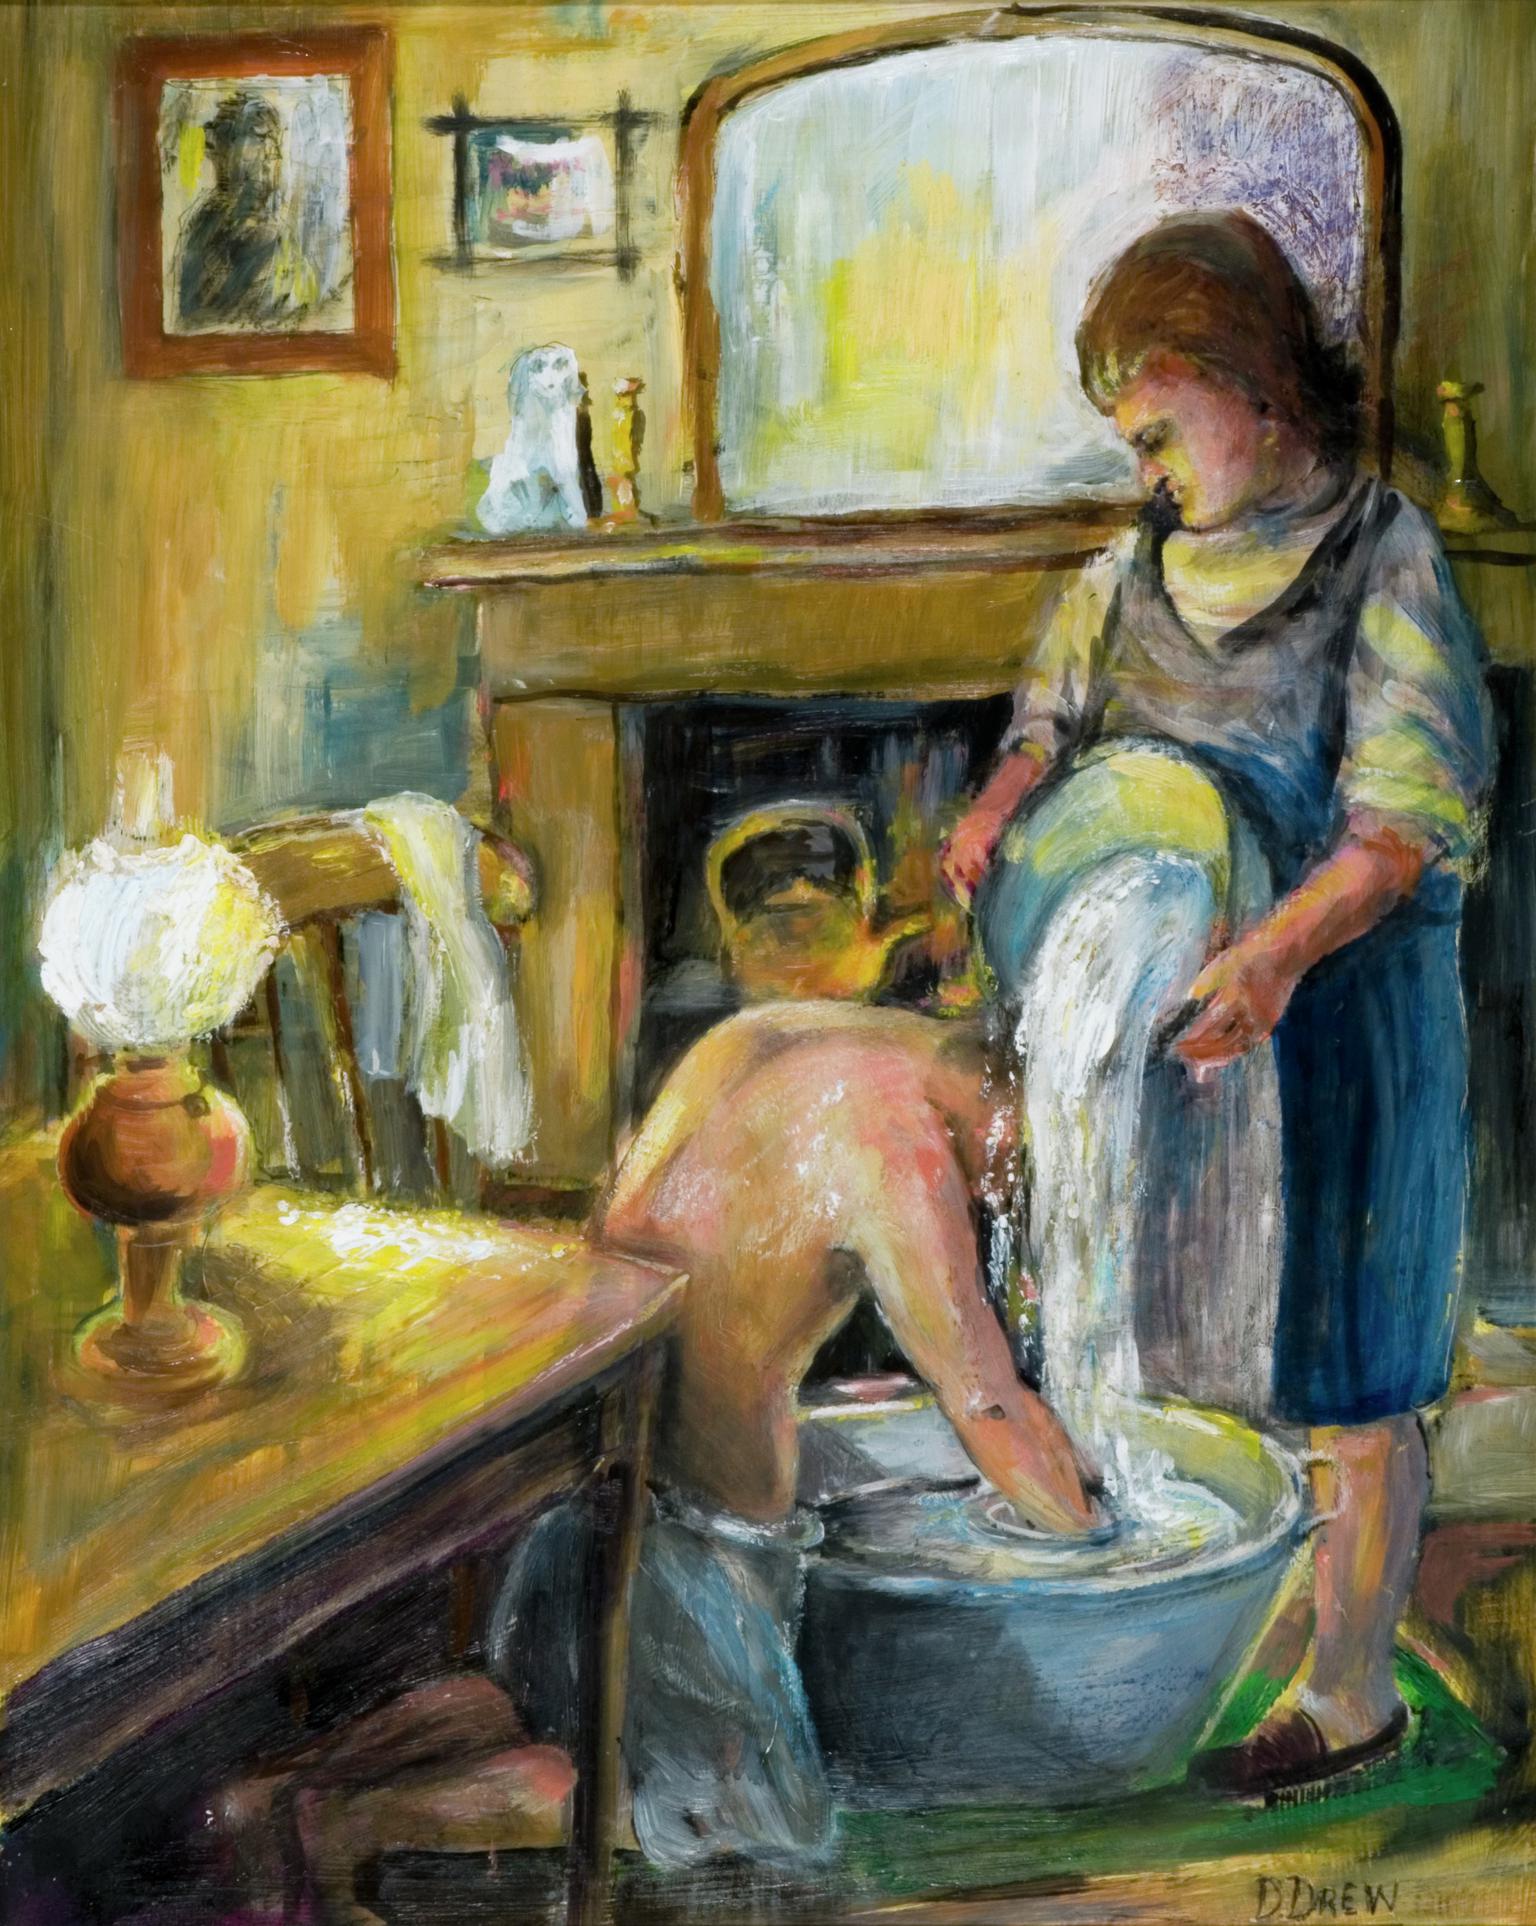 Miner bathing in tin bath, painting